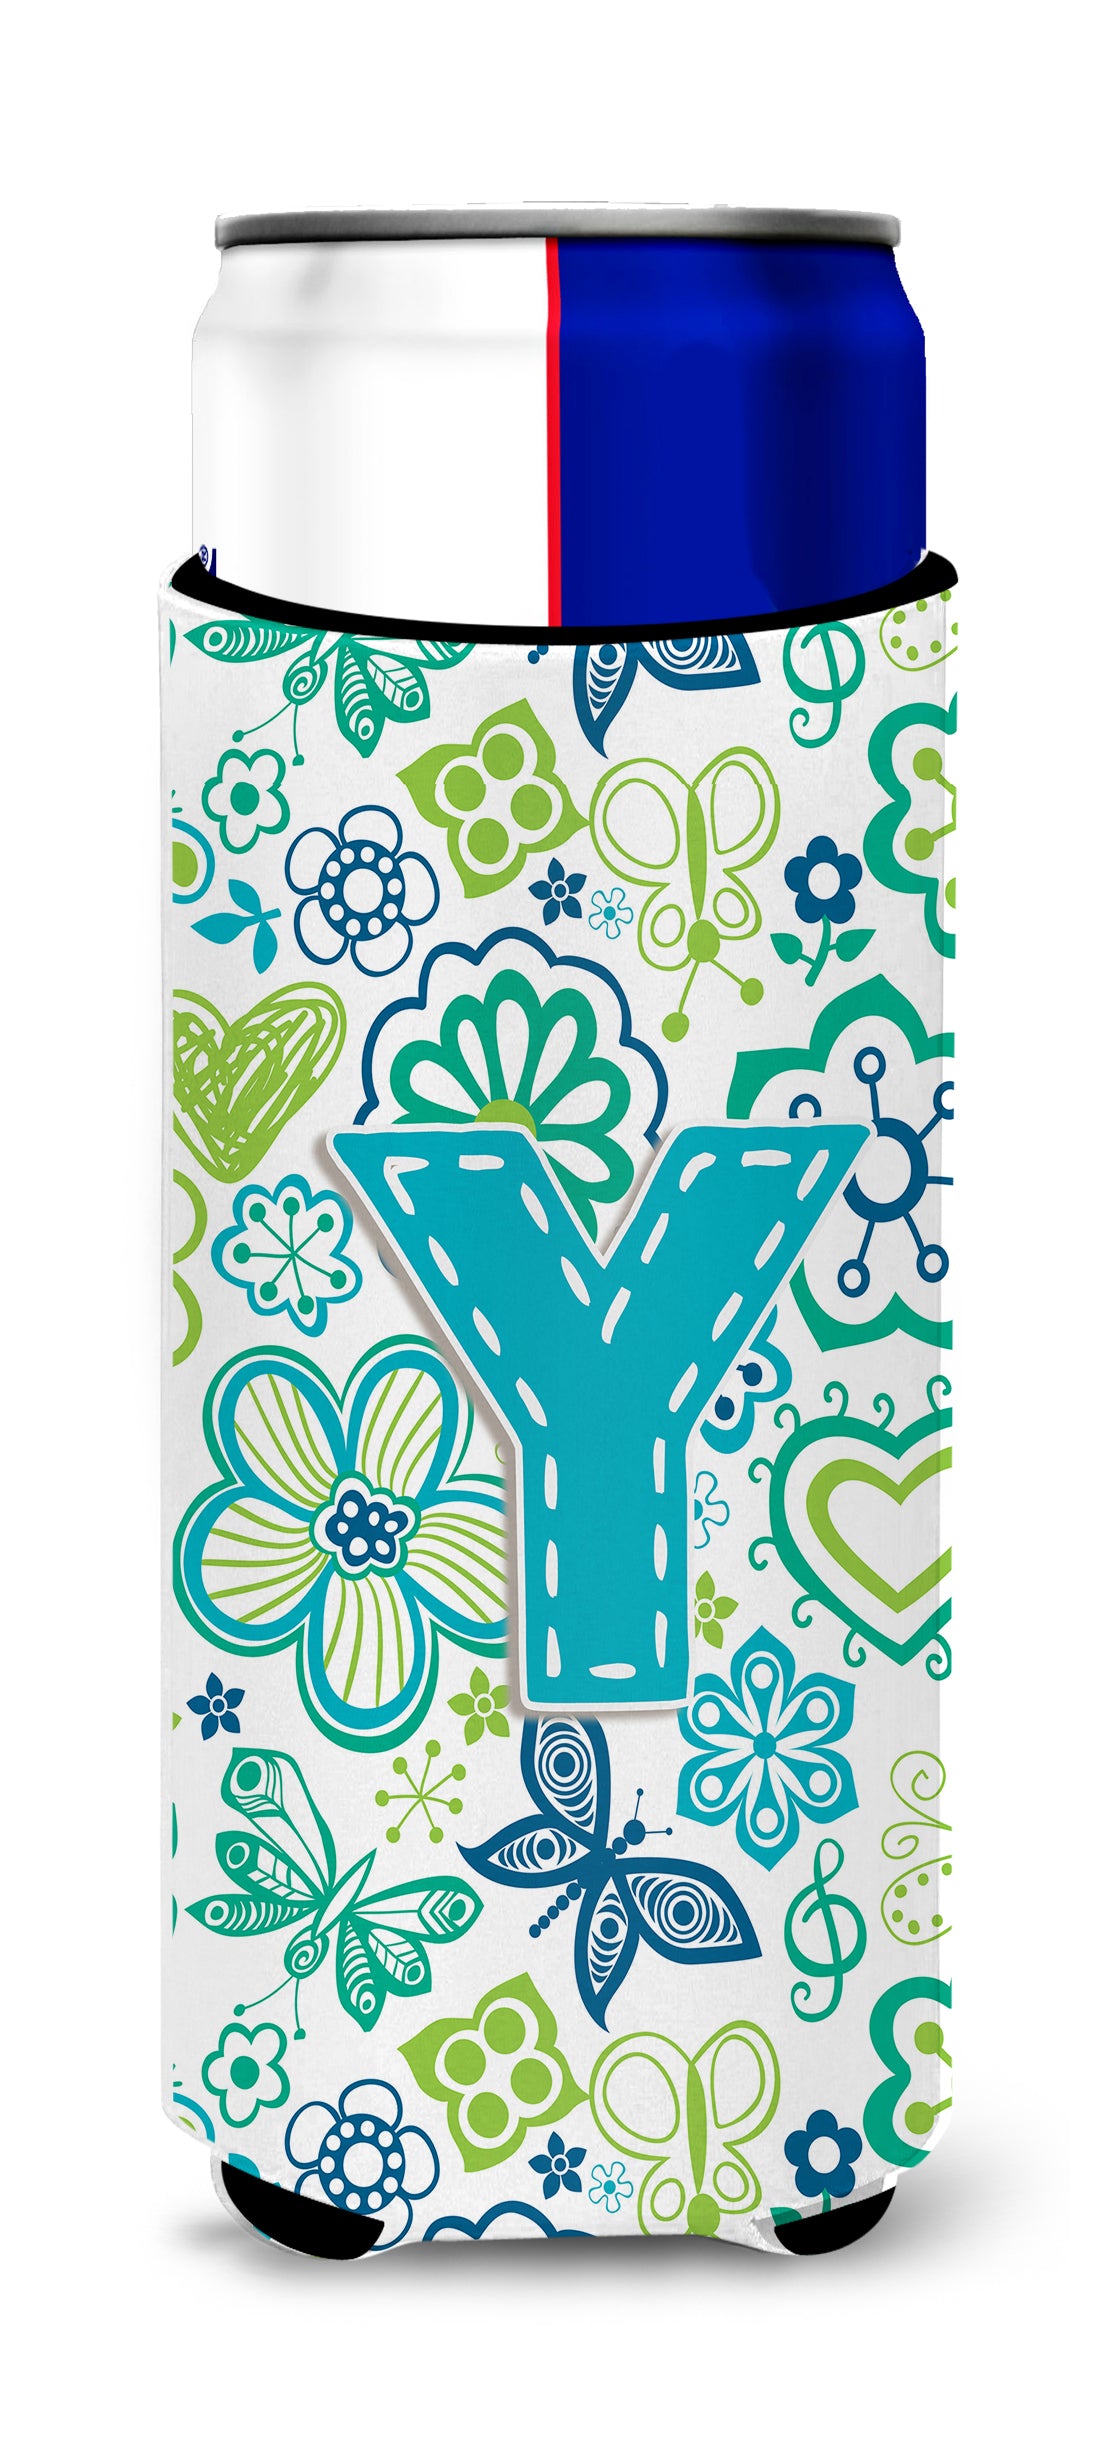 Letter Y Flowers and Butterflies Teal Blue Ultra Beverage Insulators for slim cans CJ2006-YMUK.